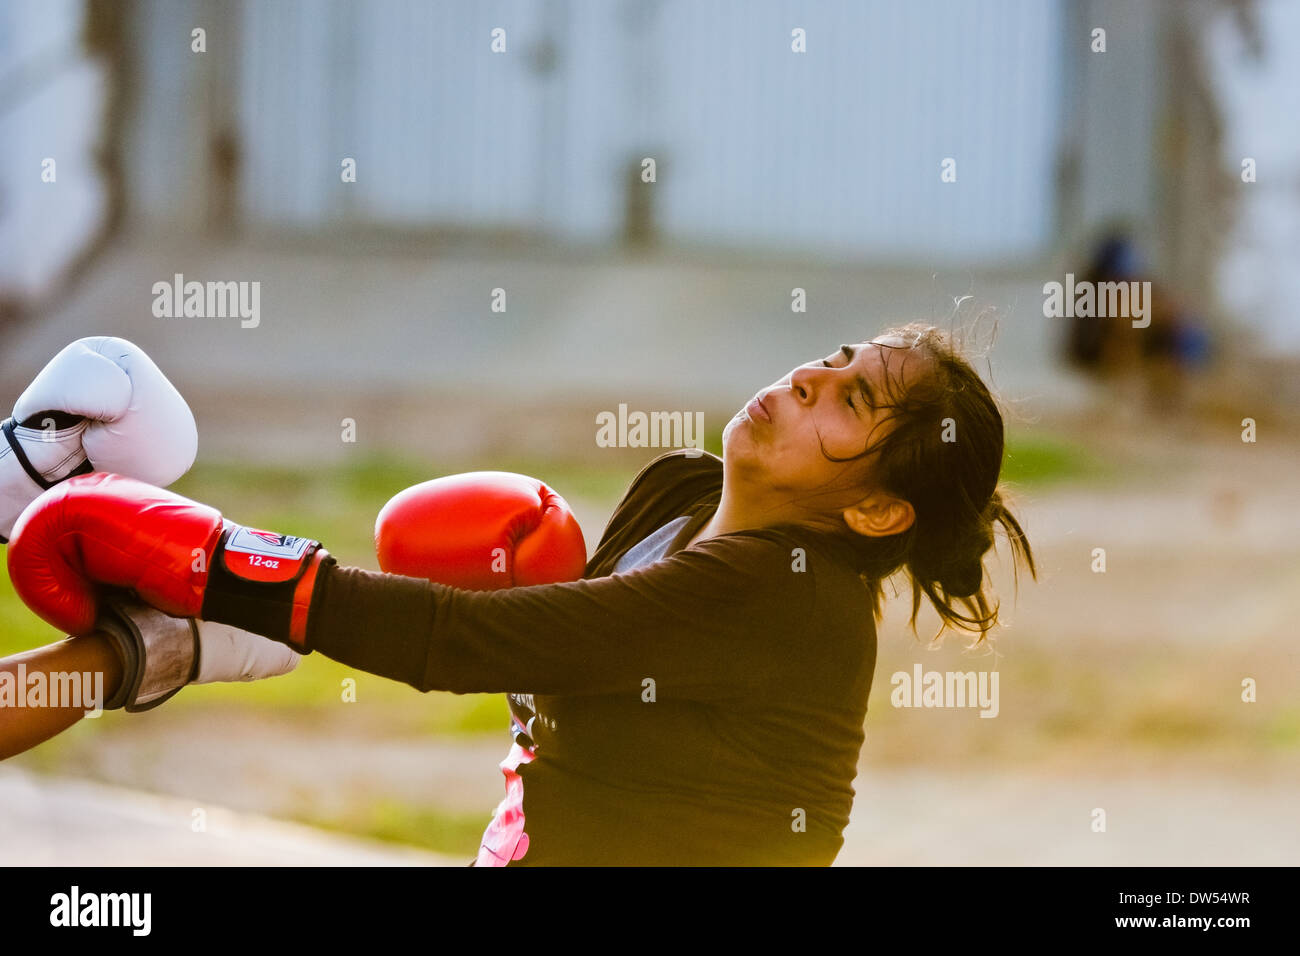 A Peruvian girl is seen being hit while training in the outdoor boxing school in Callao, Peru. Stock Photo